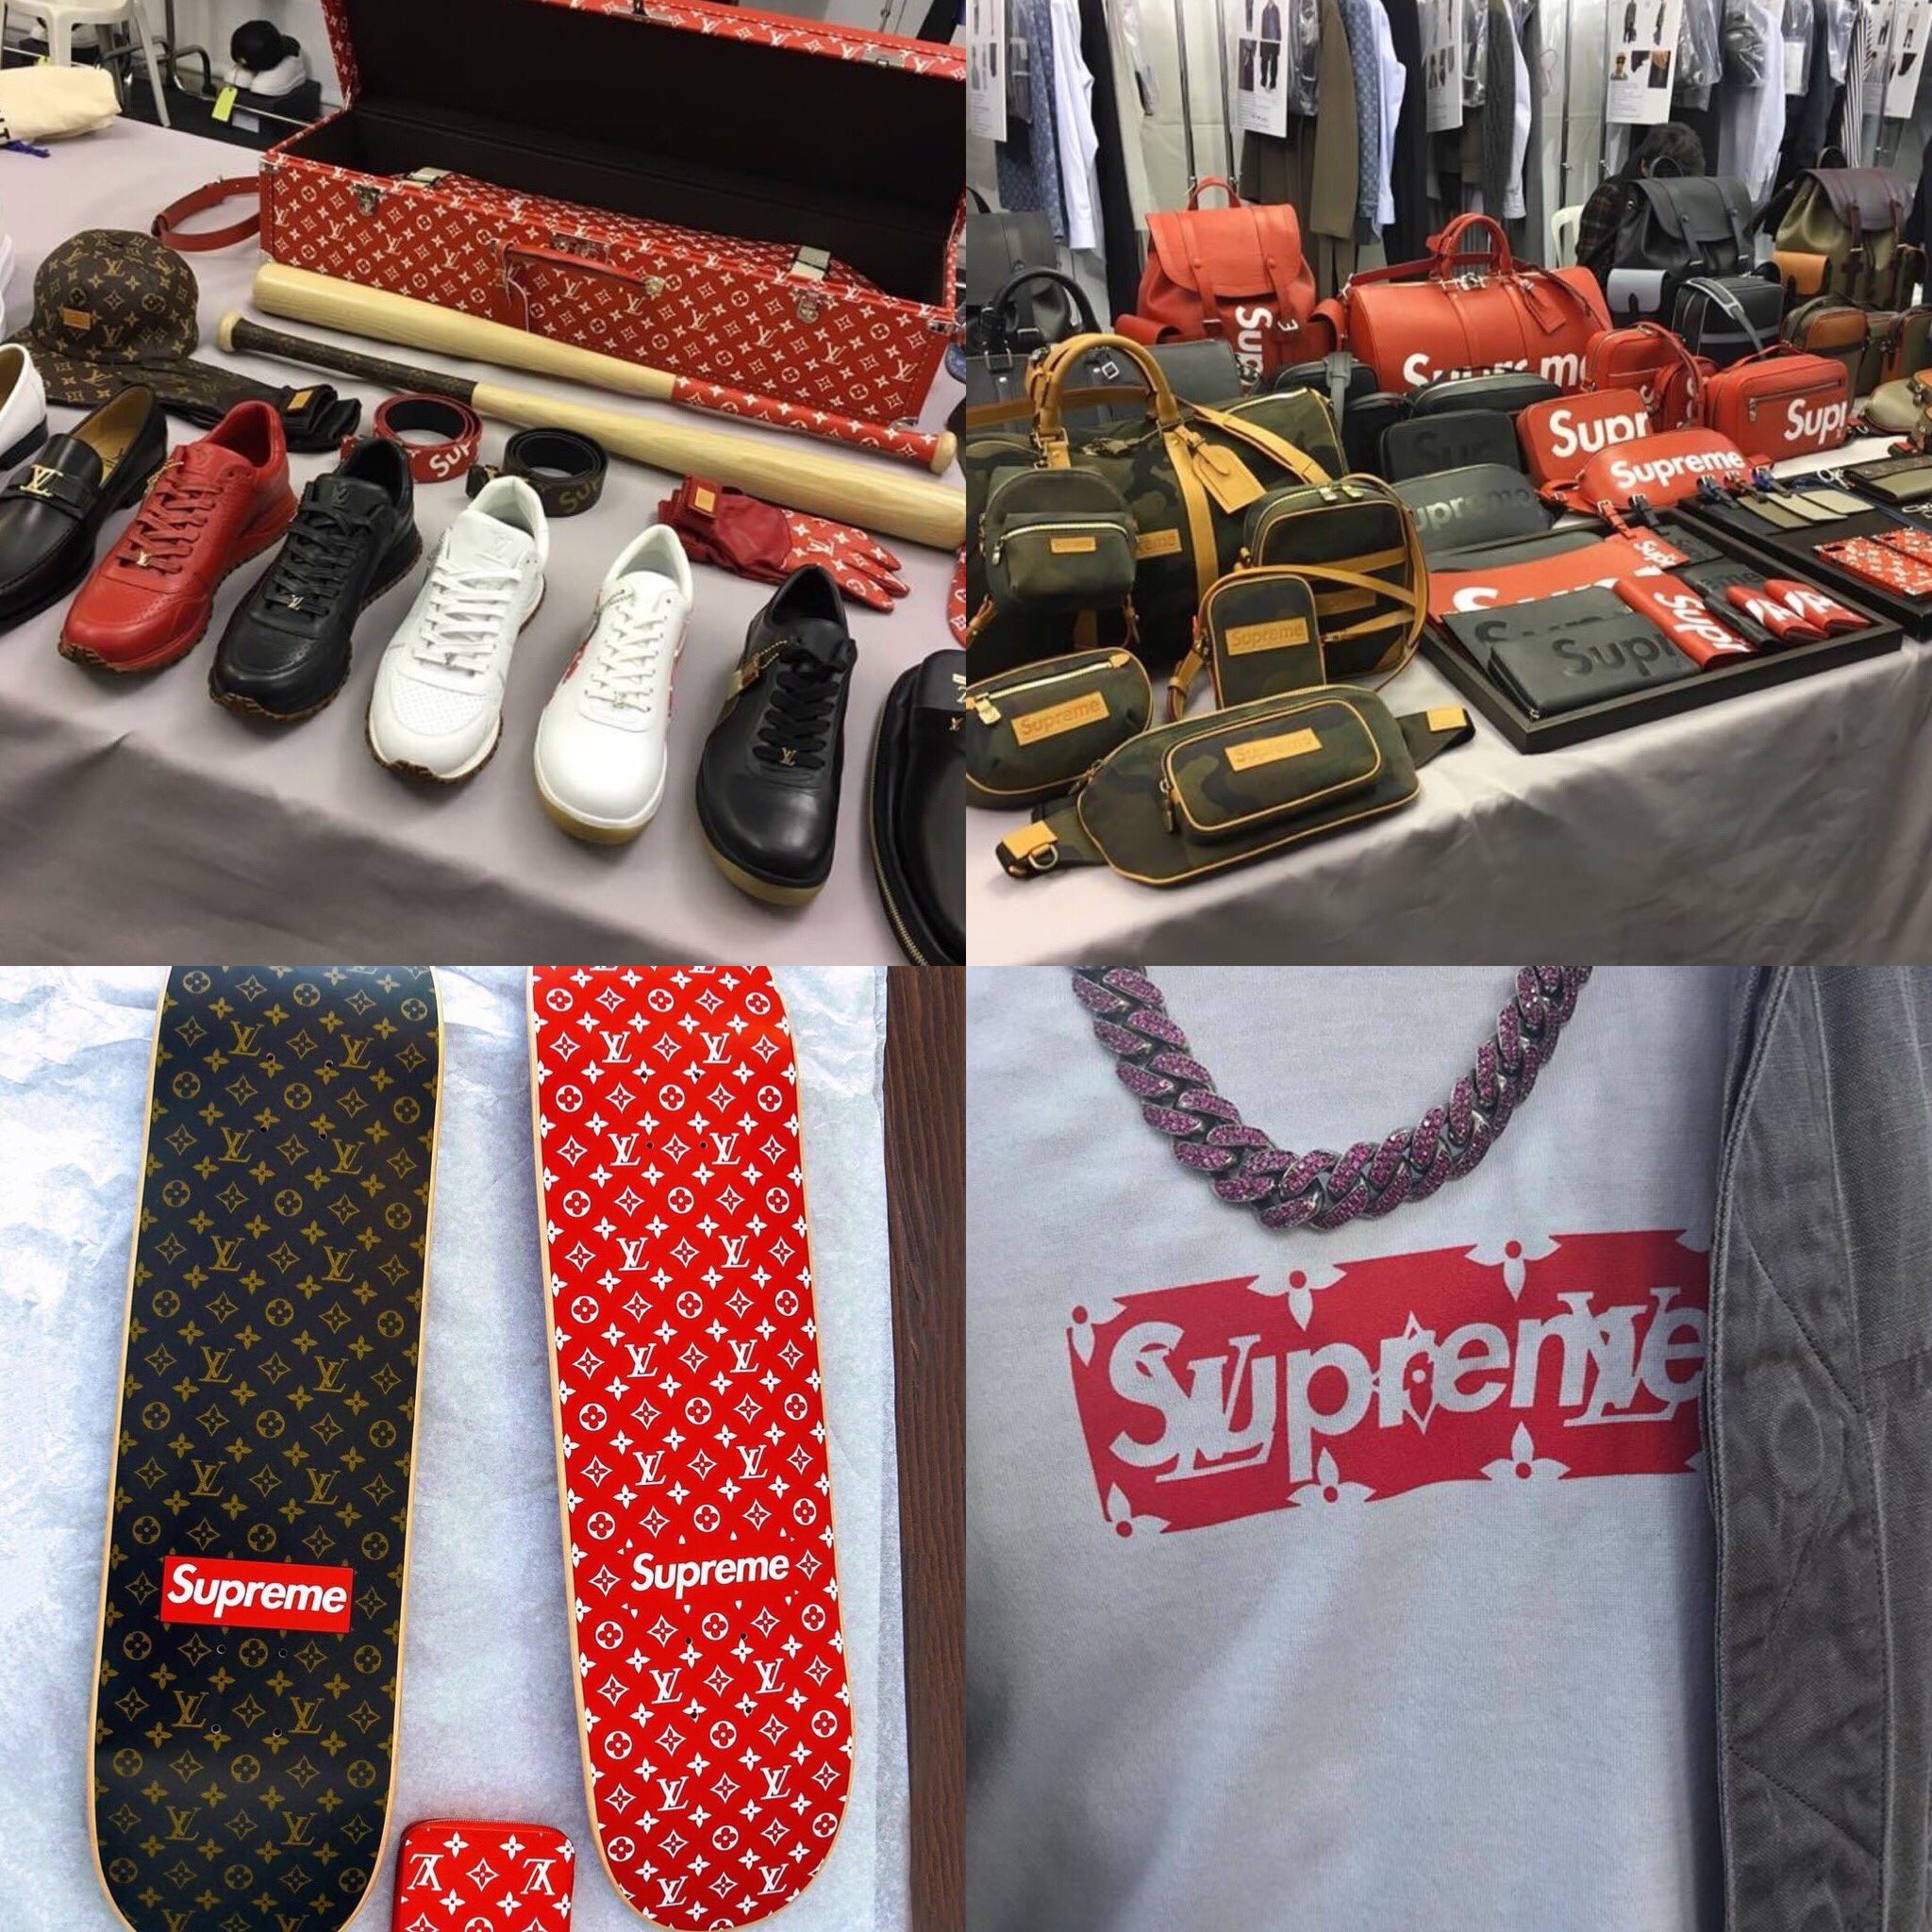 JON on X: Supreme x Louis Vuitton collab look like bootlegs from Canal  Street - too much branding. Best pieces are skate deck, BOGO, & bat  #supremelv  / X